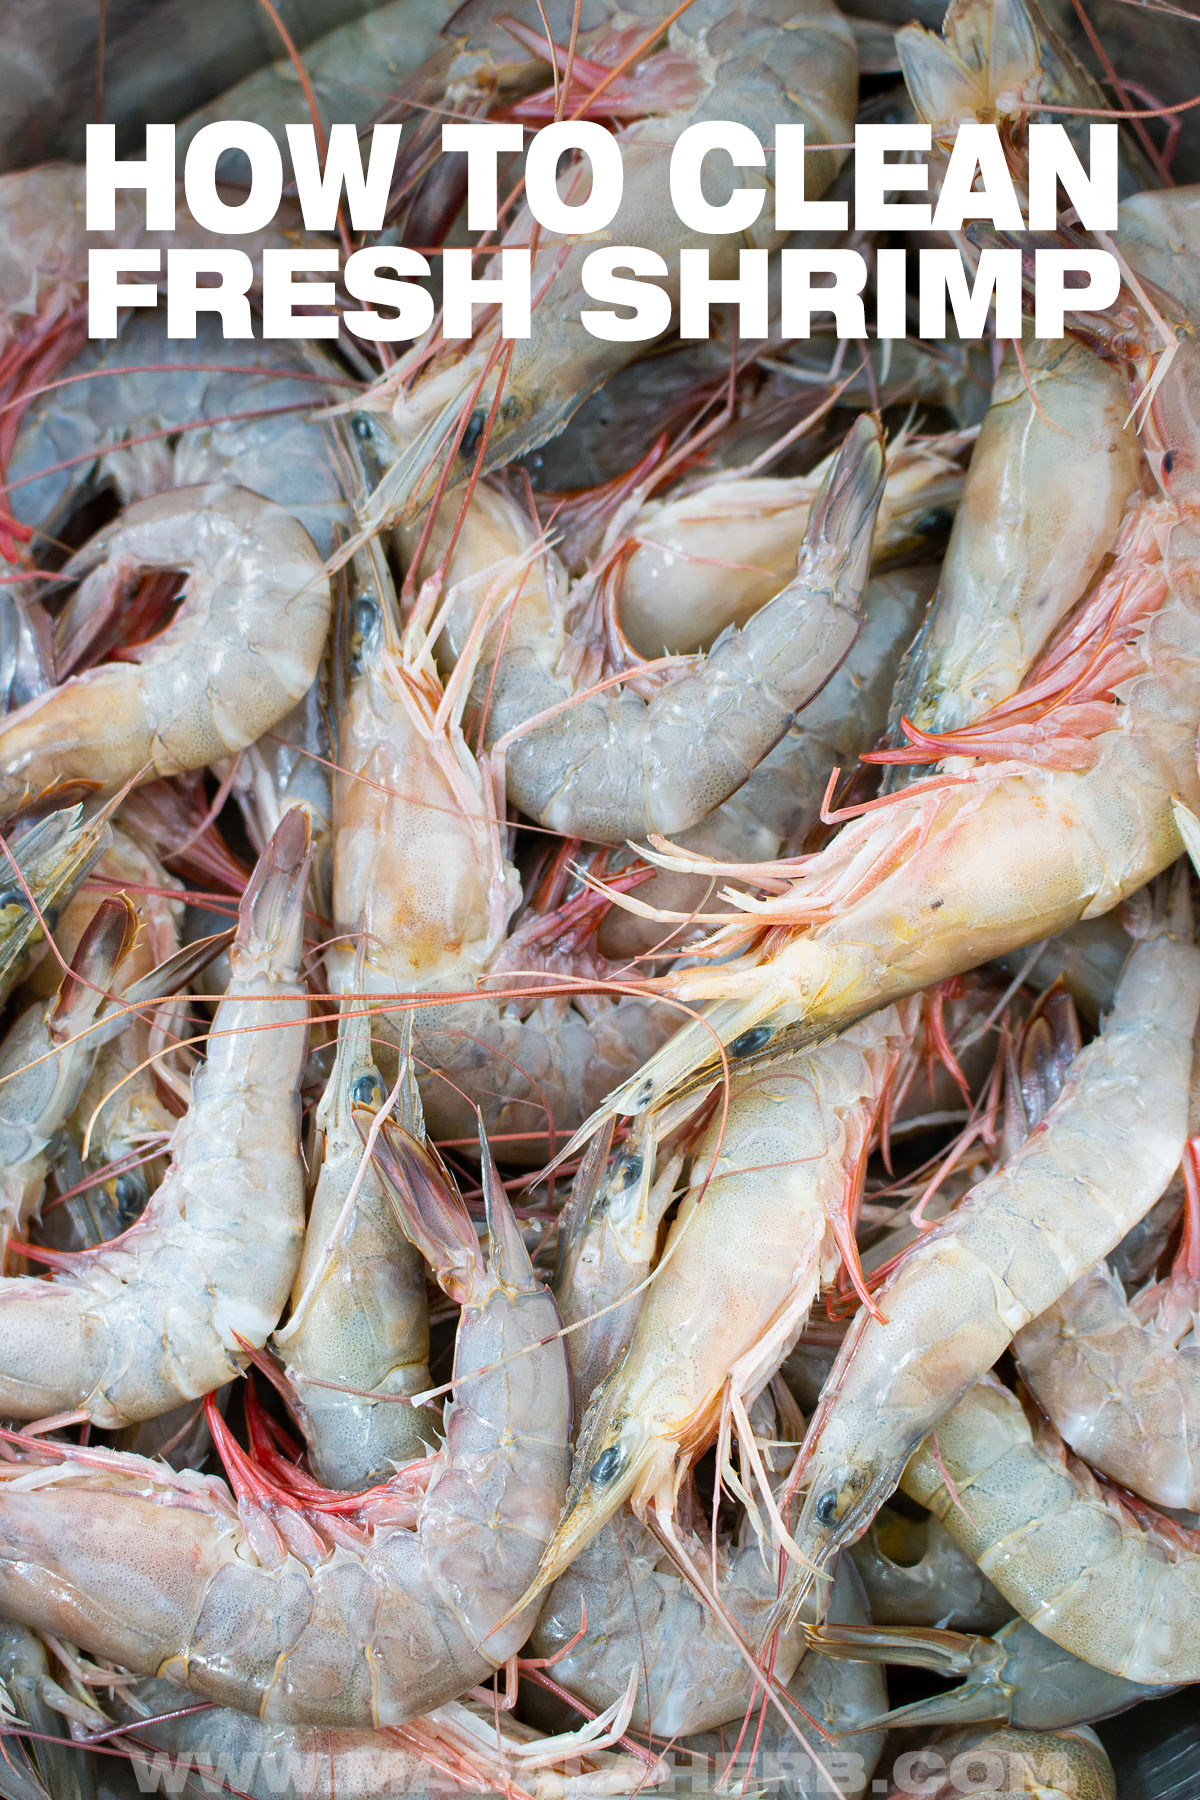 How to peel and devein fresh Shrimp cover image